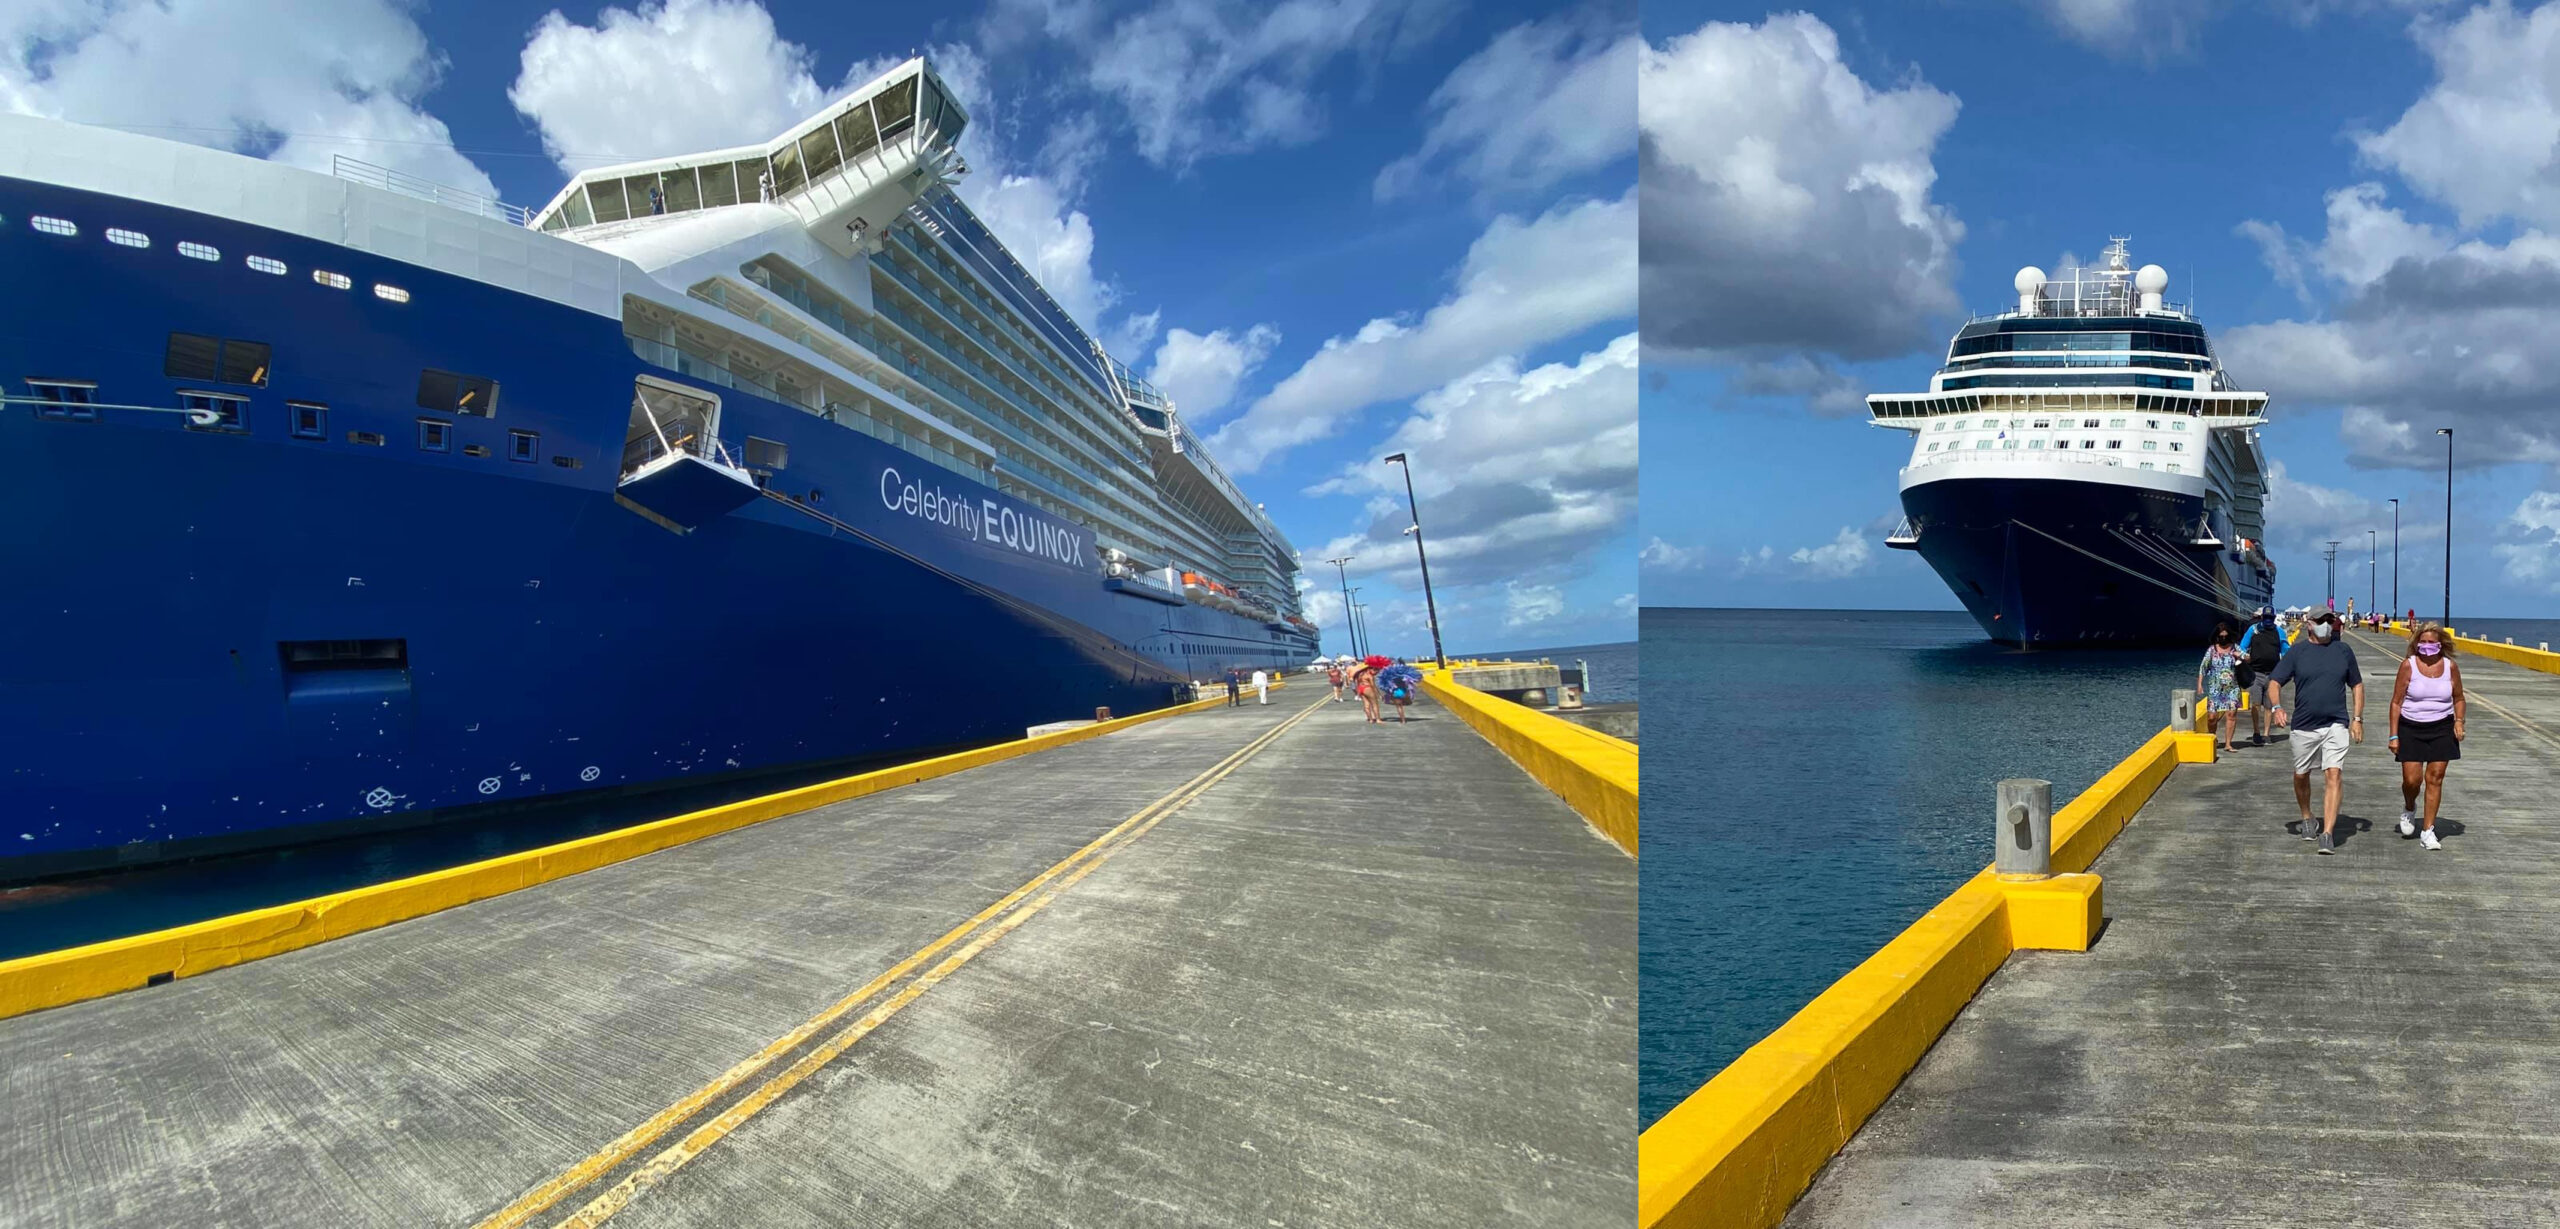 VIPA Welcomes Celebrity Equinox Guests Back To St. Croix This Morning